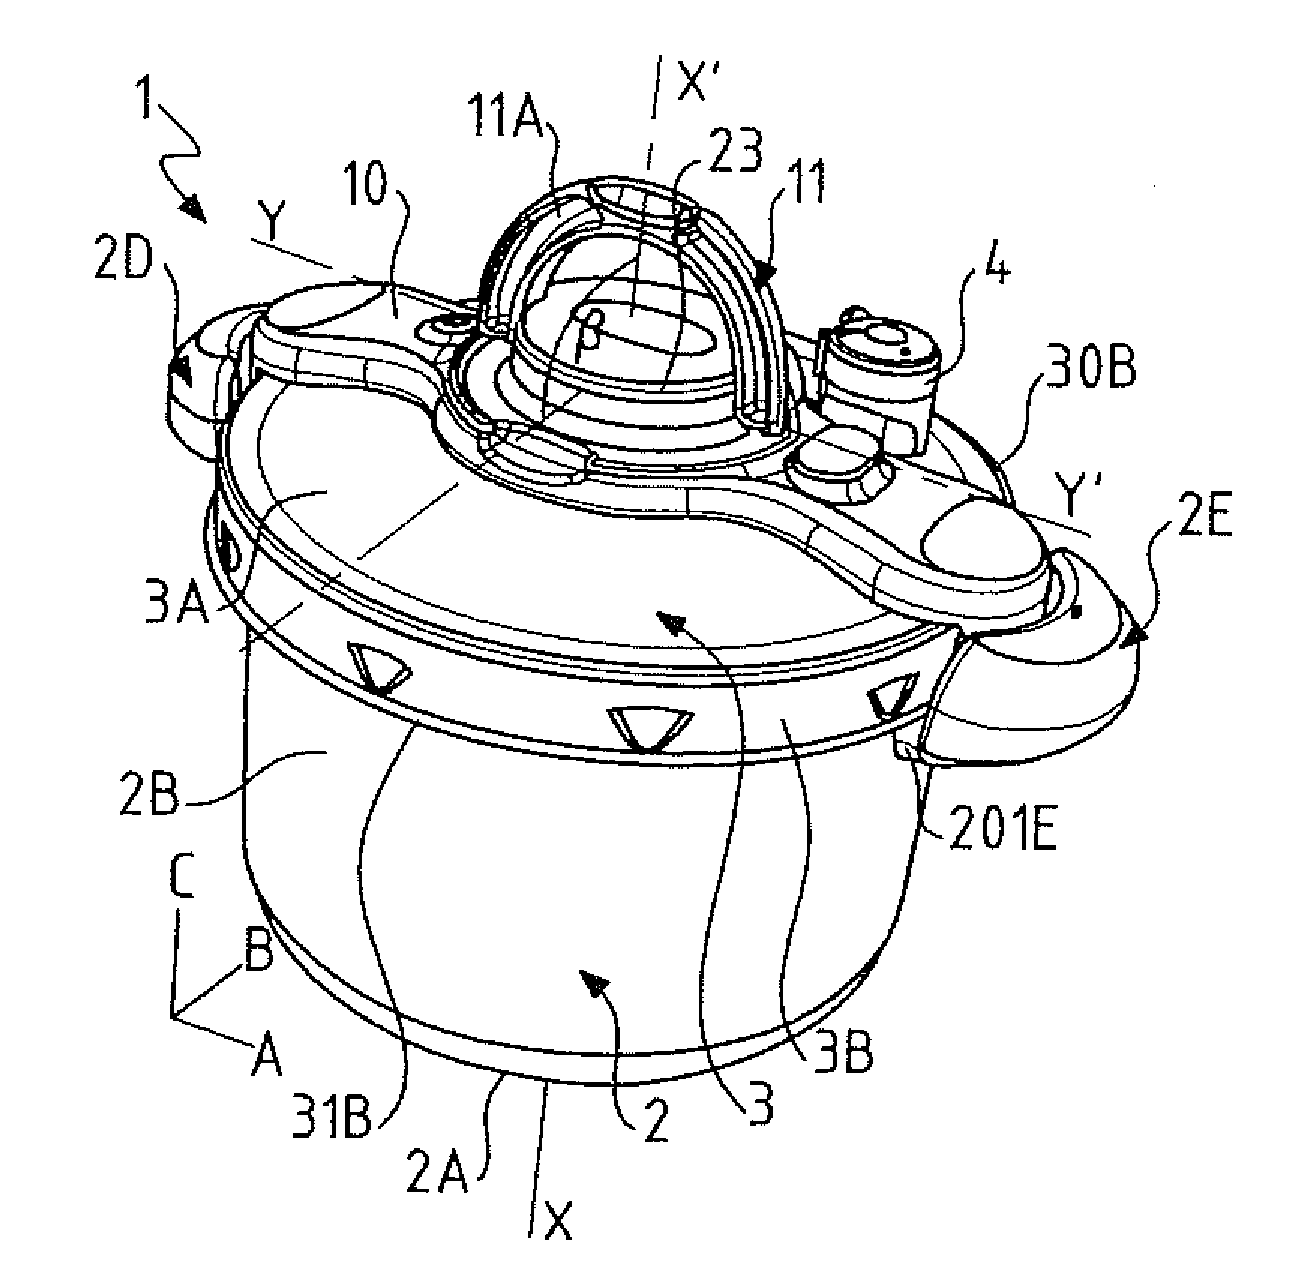 Bayonet-fitting pressure cooker provided with a vessel handle